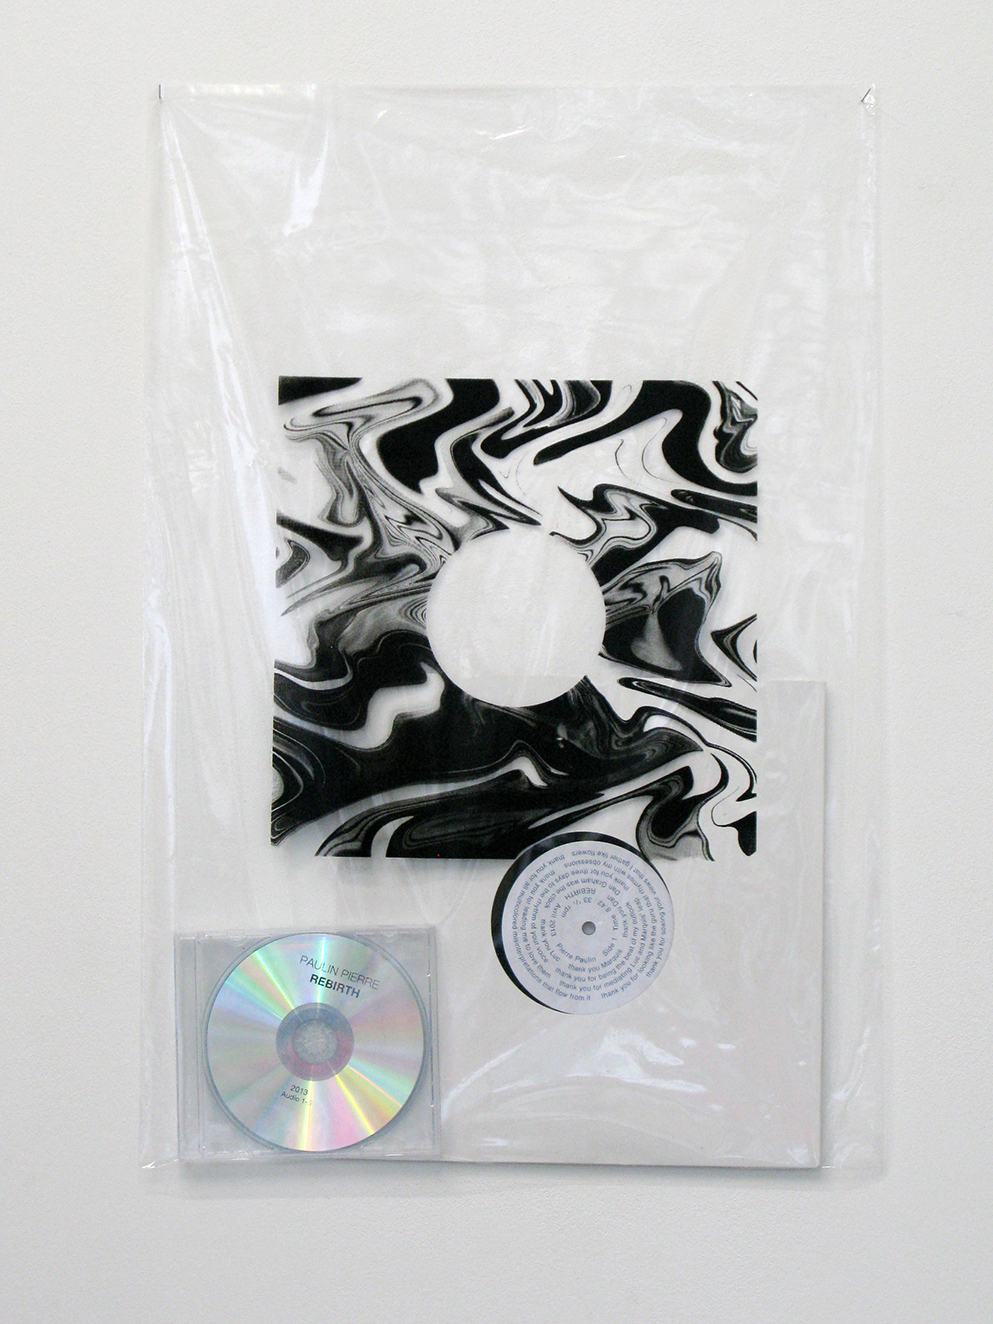 , 2013, Vinyl, cardboard, compact disc and silskscreen plastic, 60 x 40 cm, Edition of 3  + 1 AP